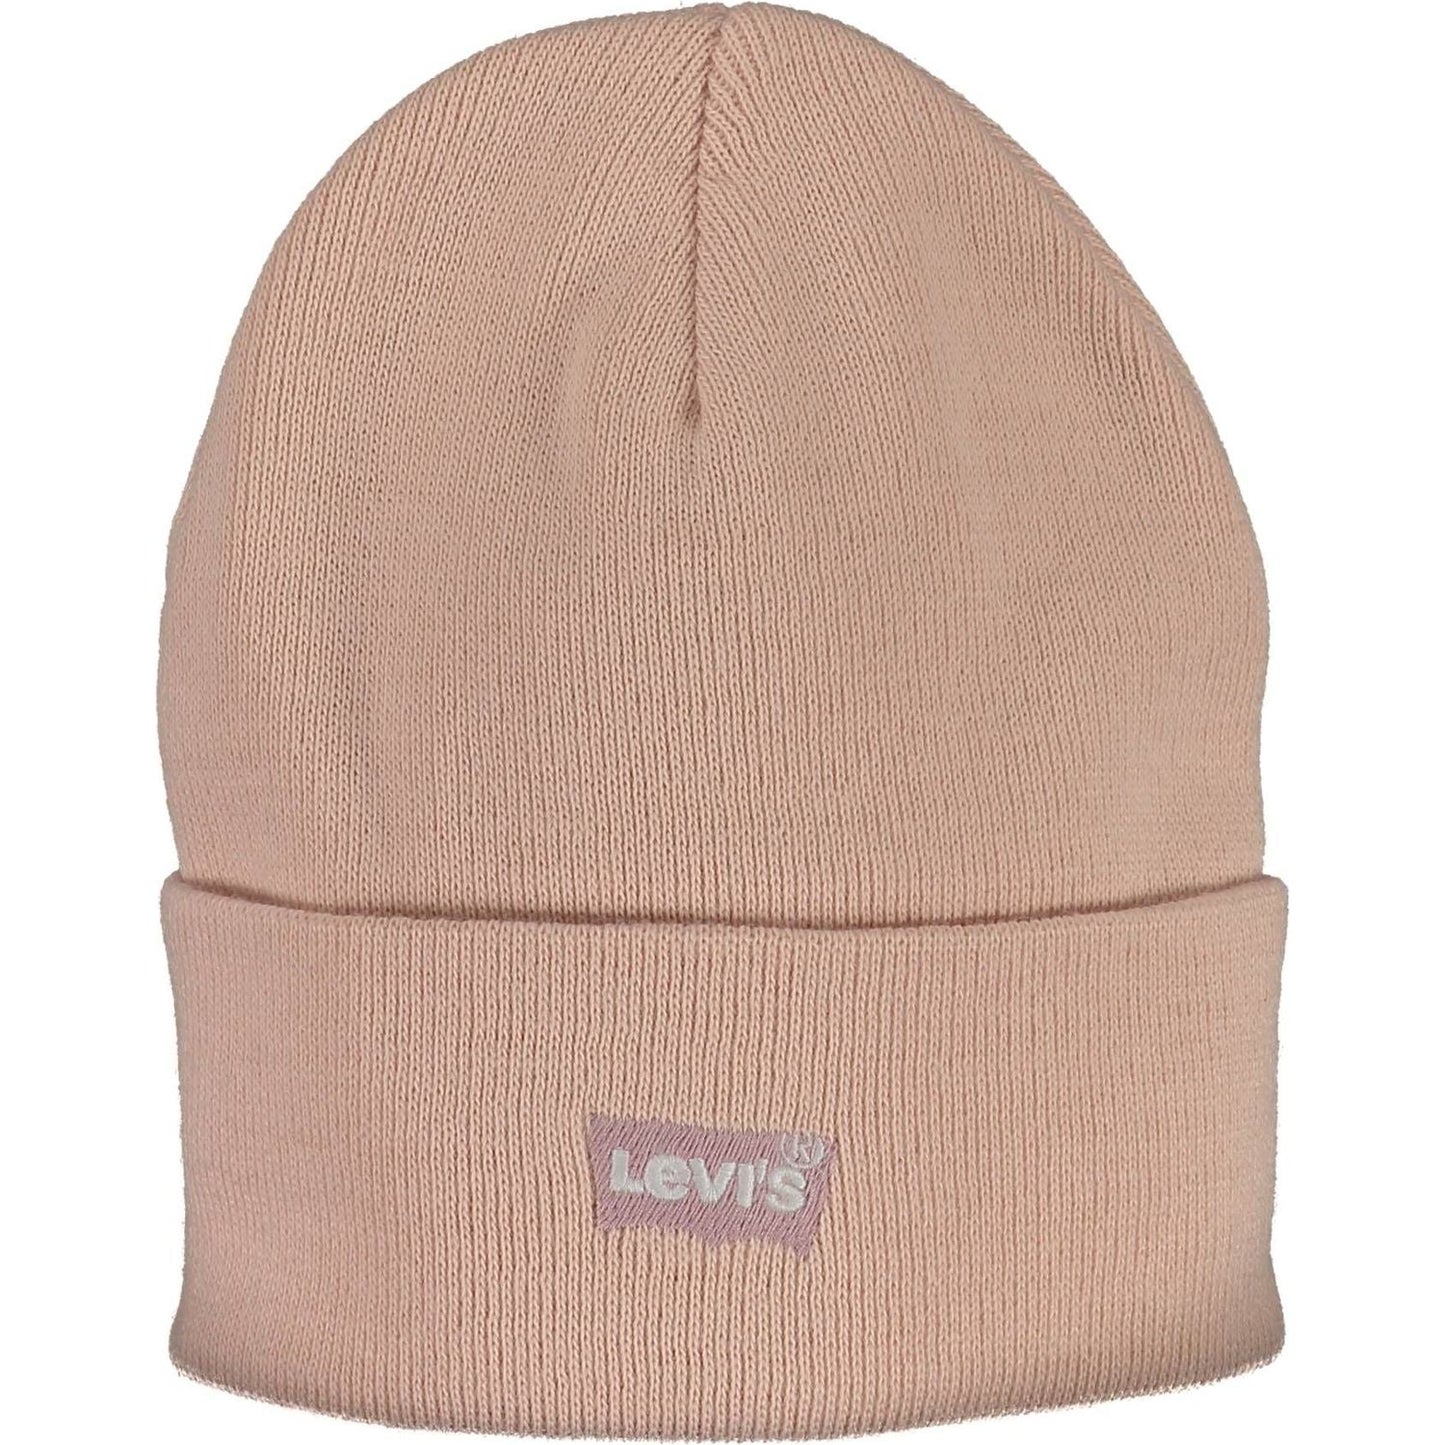 Levi's Chic Pink Embroidered Logo Cap chic-pink-embroidered-logo-cap